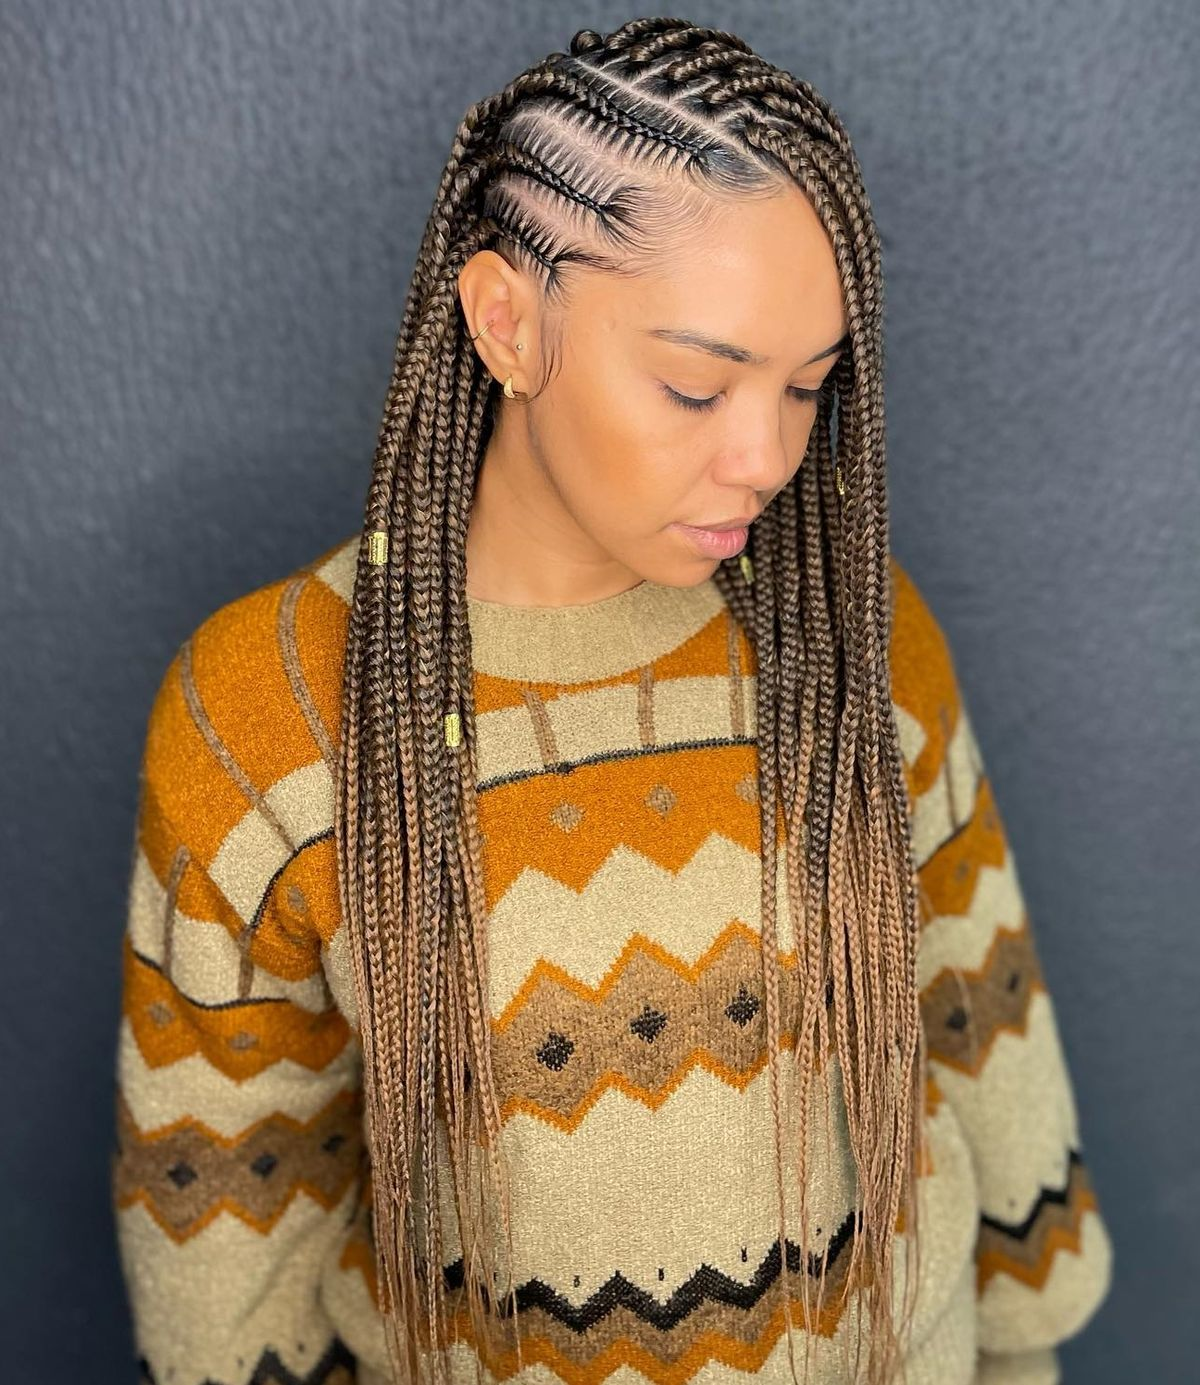 Tribal Braids with Side Parts